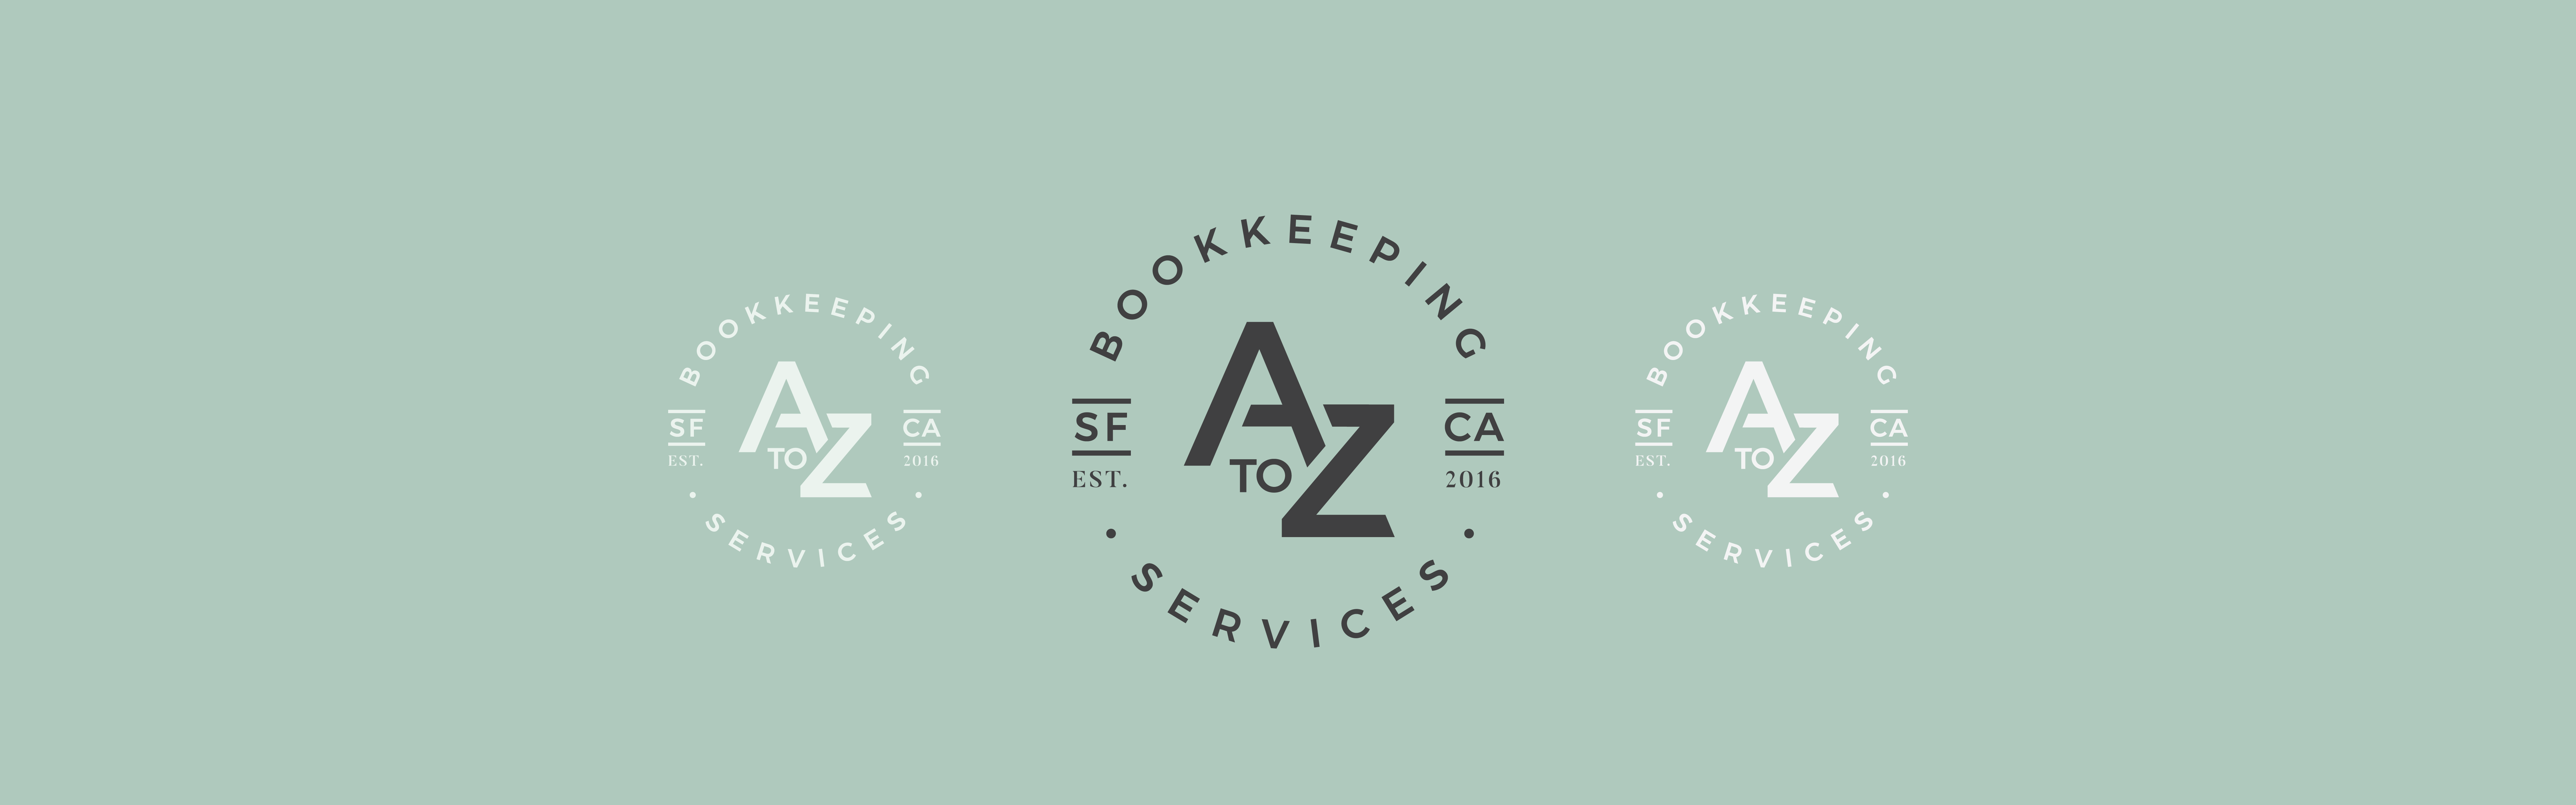 The image displays a logo for A to Z Bookkeeping services with the title "A to Z Bookkeeping Services" centered between two identical circular symbols featuring initials, a scale icon, and the establishment year